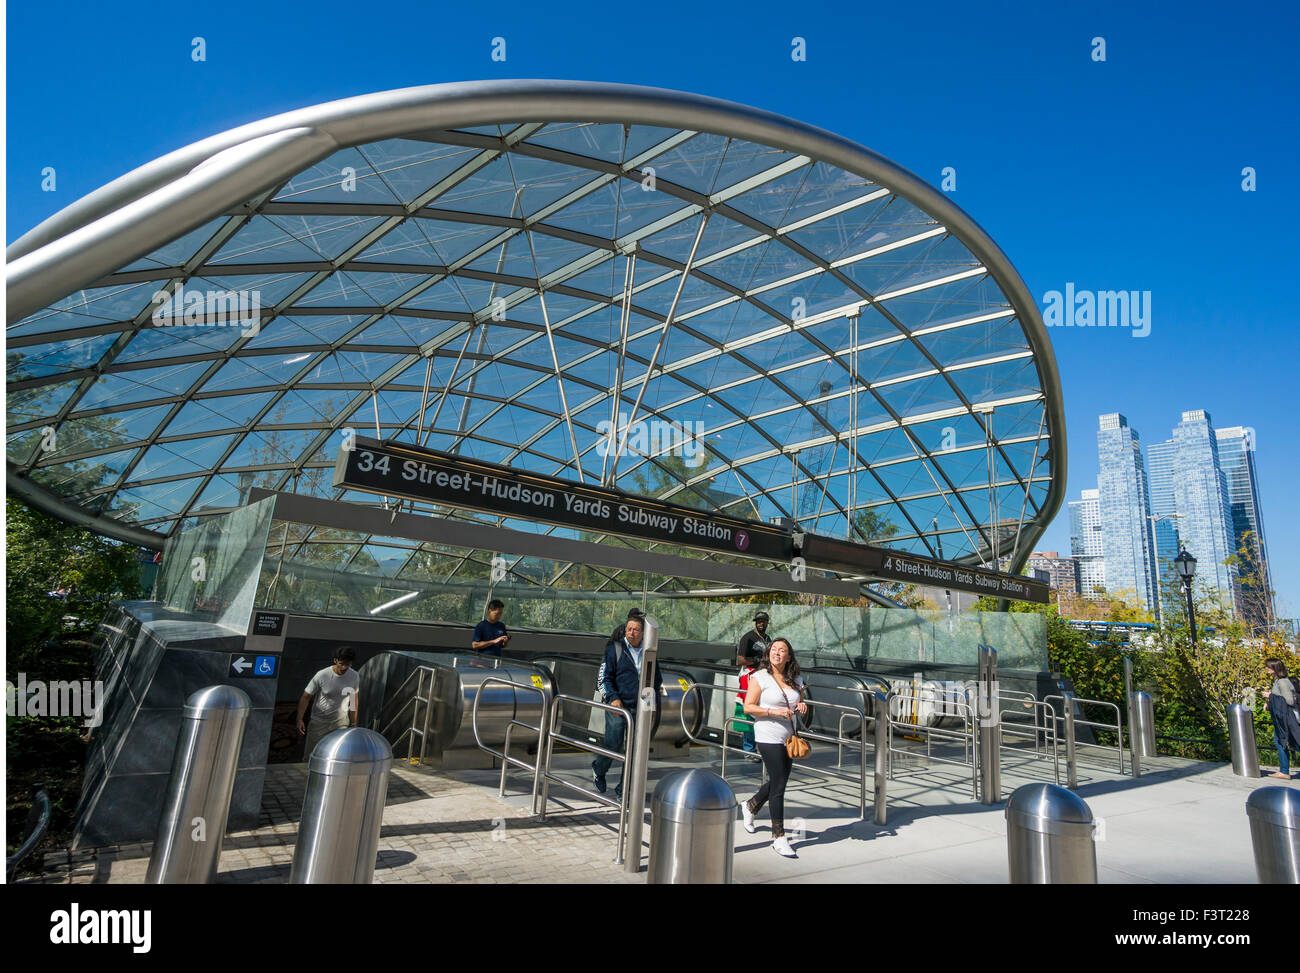 The New 34 St Hudson Yards No. 7 Train Subway station on New York City's West Side Stock Photo